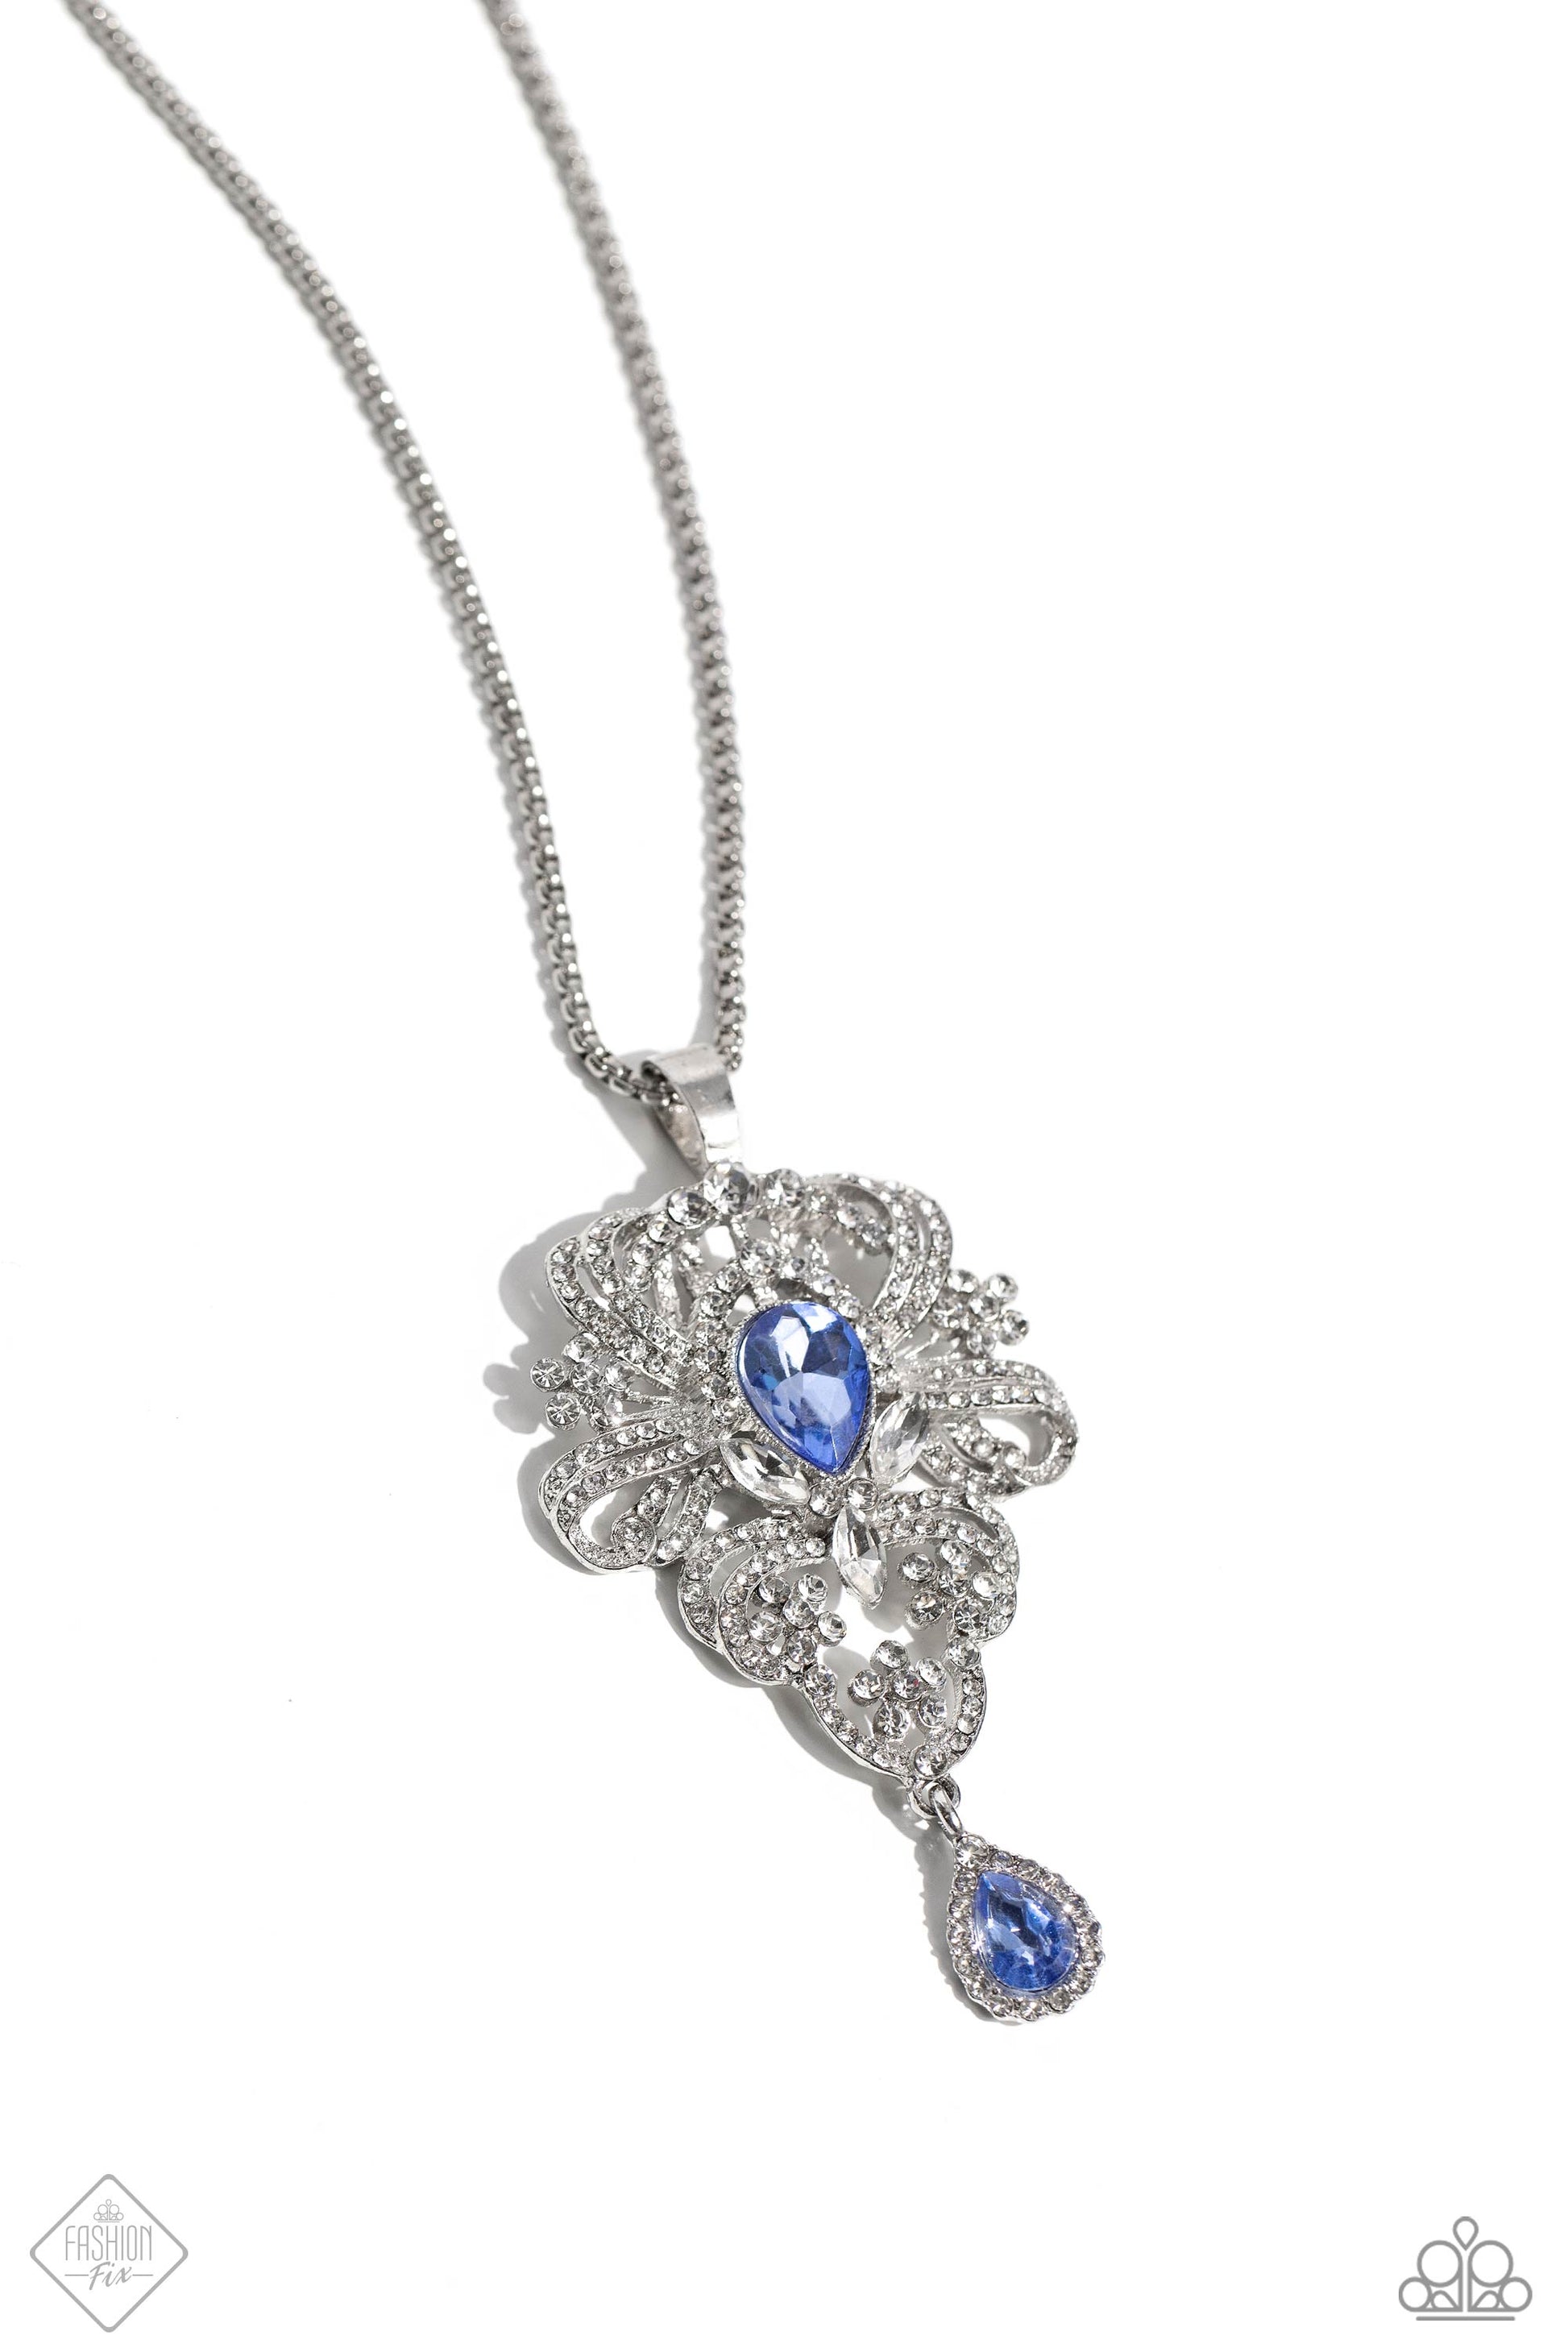 Elegance Personified - Blue and Silver Necklace - Paparazzi Accessories - Gliding along a silver box chain, a decorative, chandelier-like pendant stands out below the neckline. The decorative frame swirls with dainty white rhinestones, white marquise-cut gems, and an upside-down blue gem for a timelessly over-the-top sparkle. Bordered by glassy white rhinestones, an upright, smaller blue teardrop gem creates a dainty fringe at the bottom of the frame for an additional pop of elegant color.